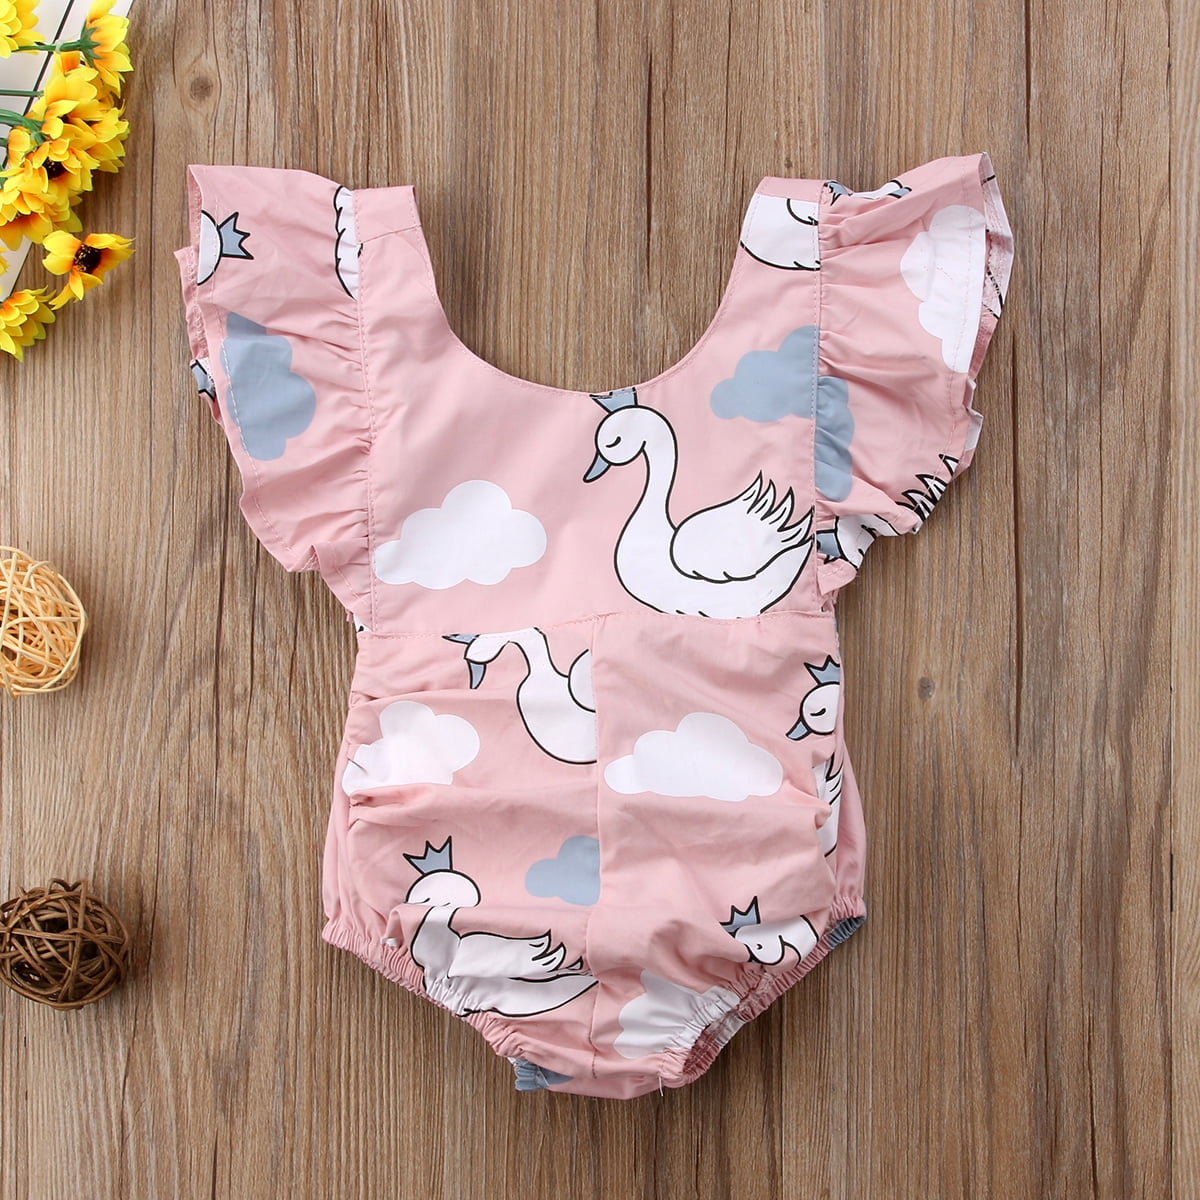 swan baby outfit